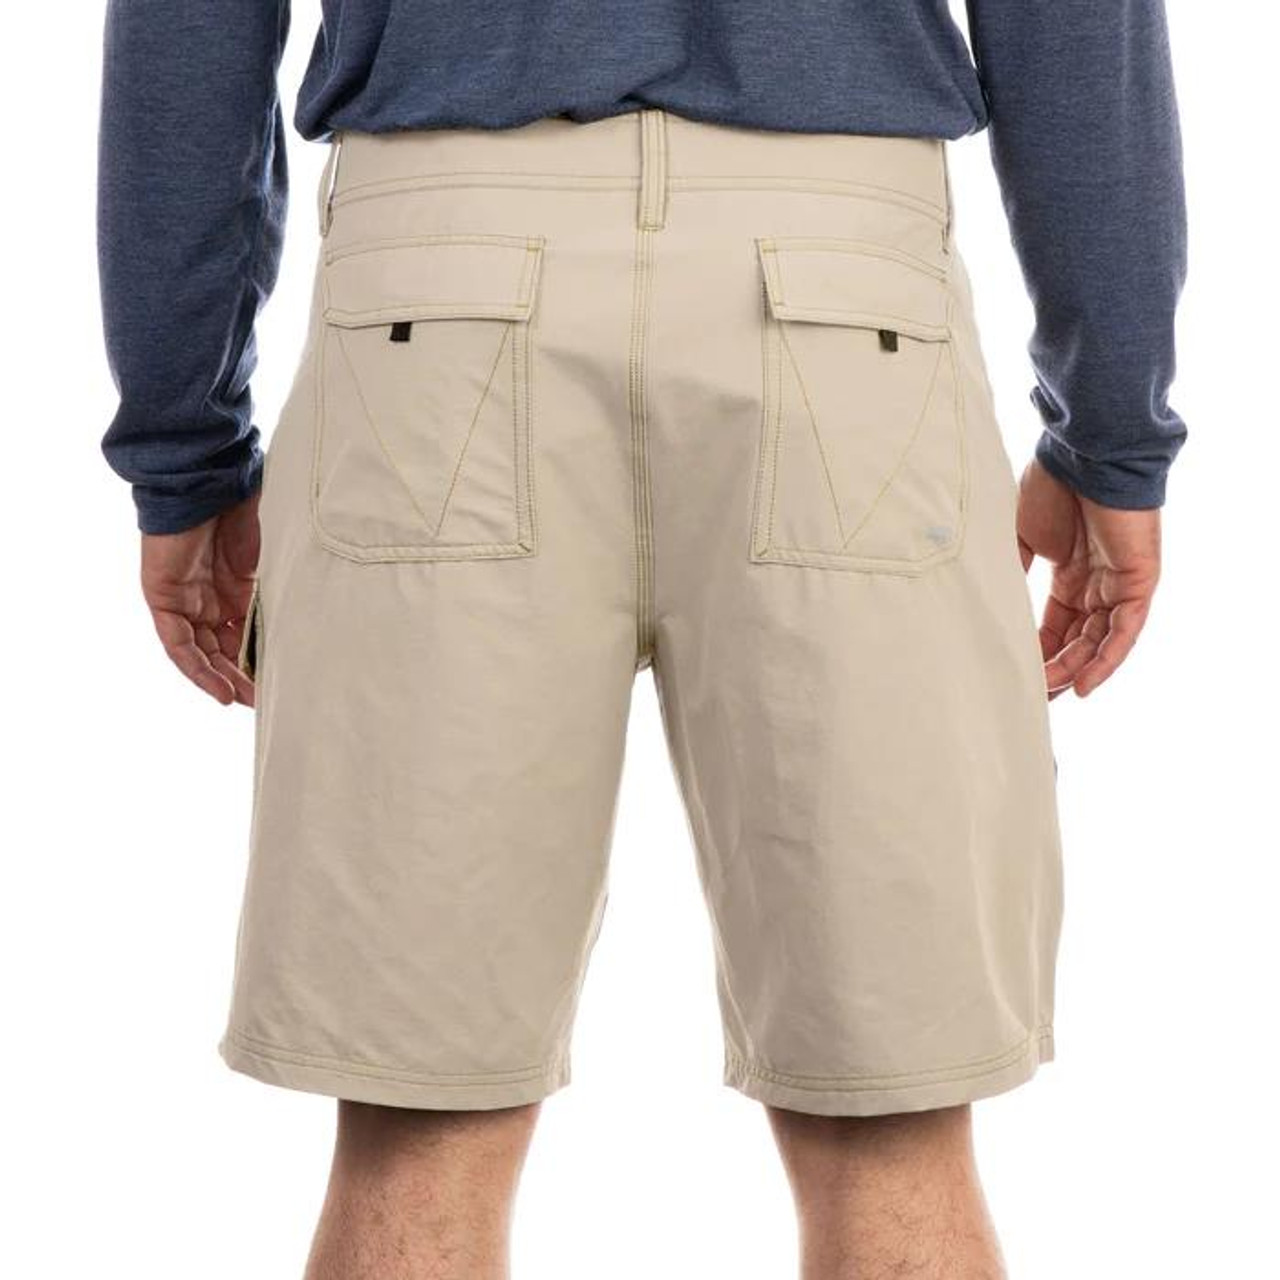 Aftco Men's Stealth Fishing Shorts - Khaki - Dance's Sporting Goods